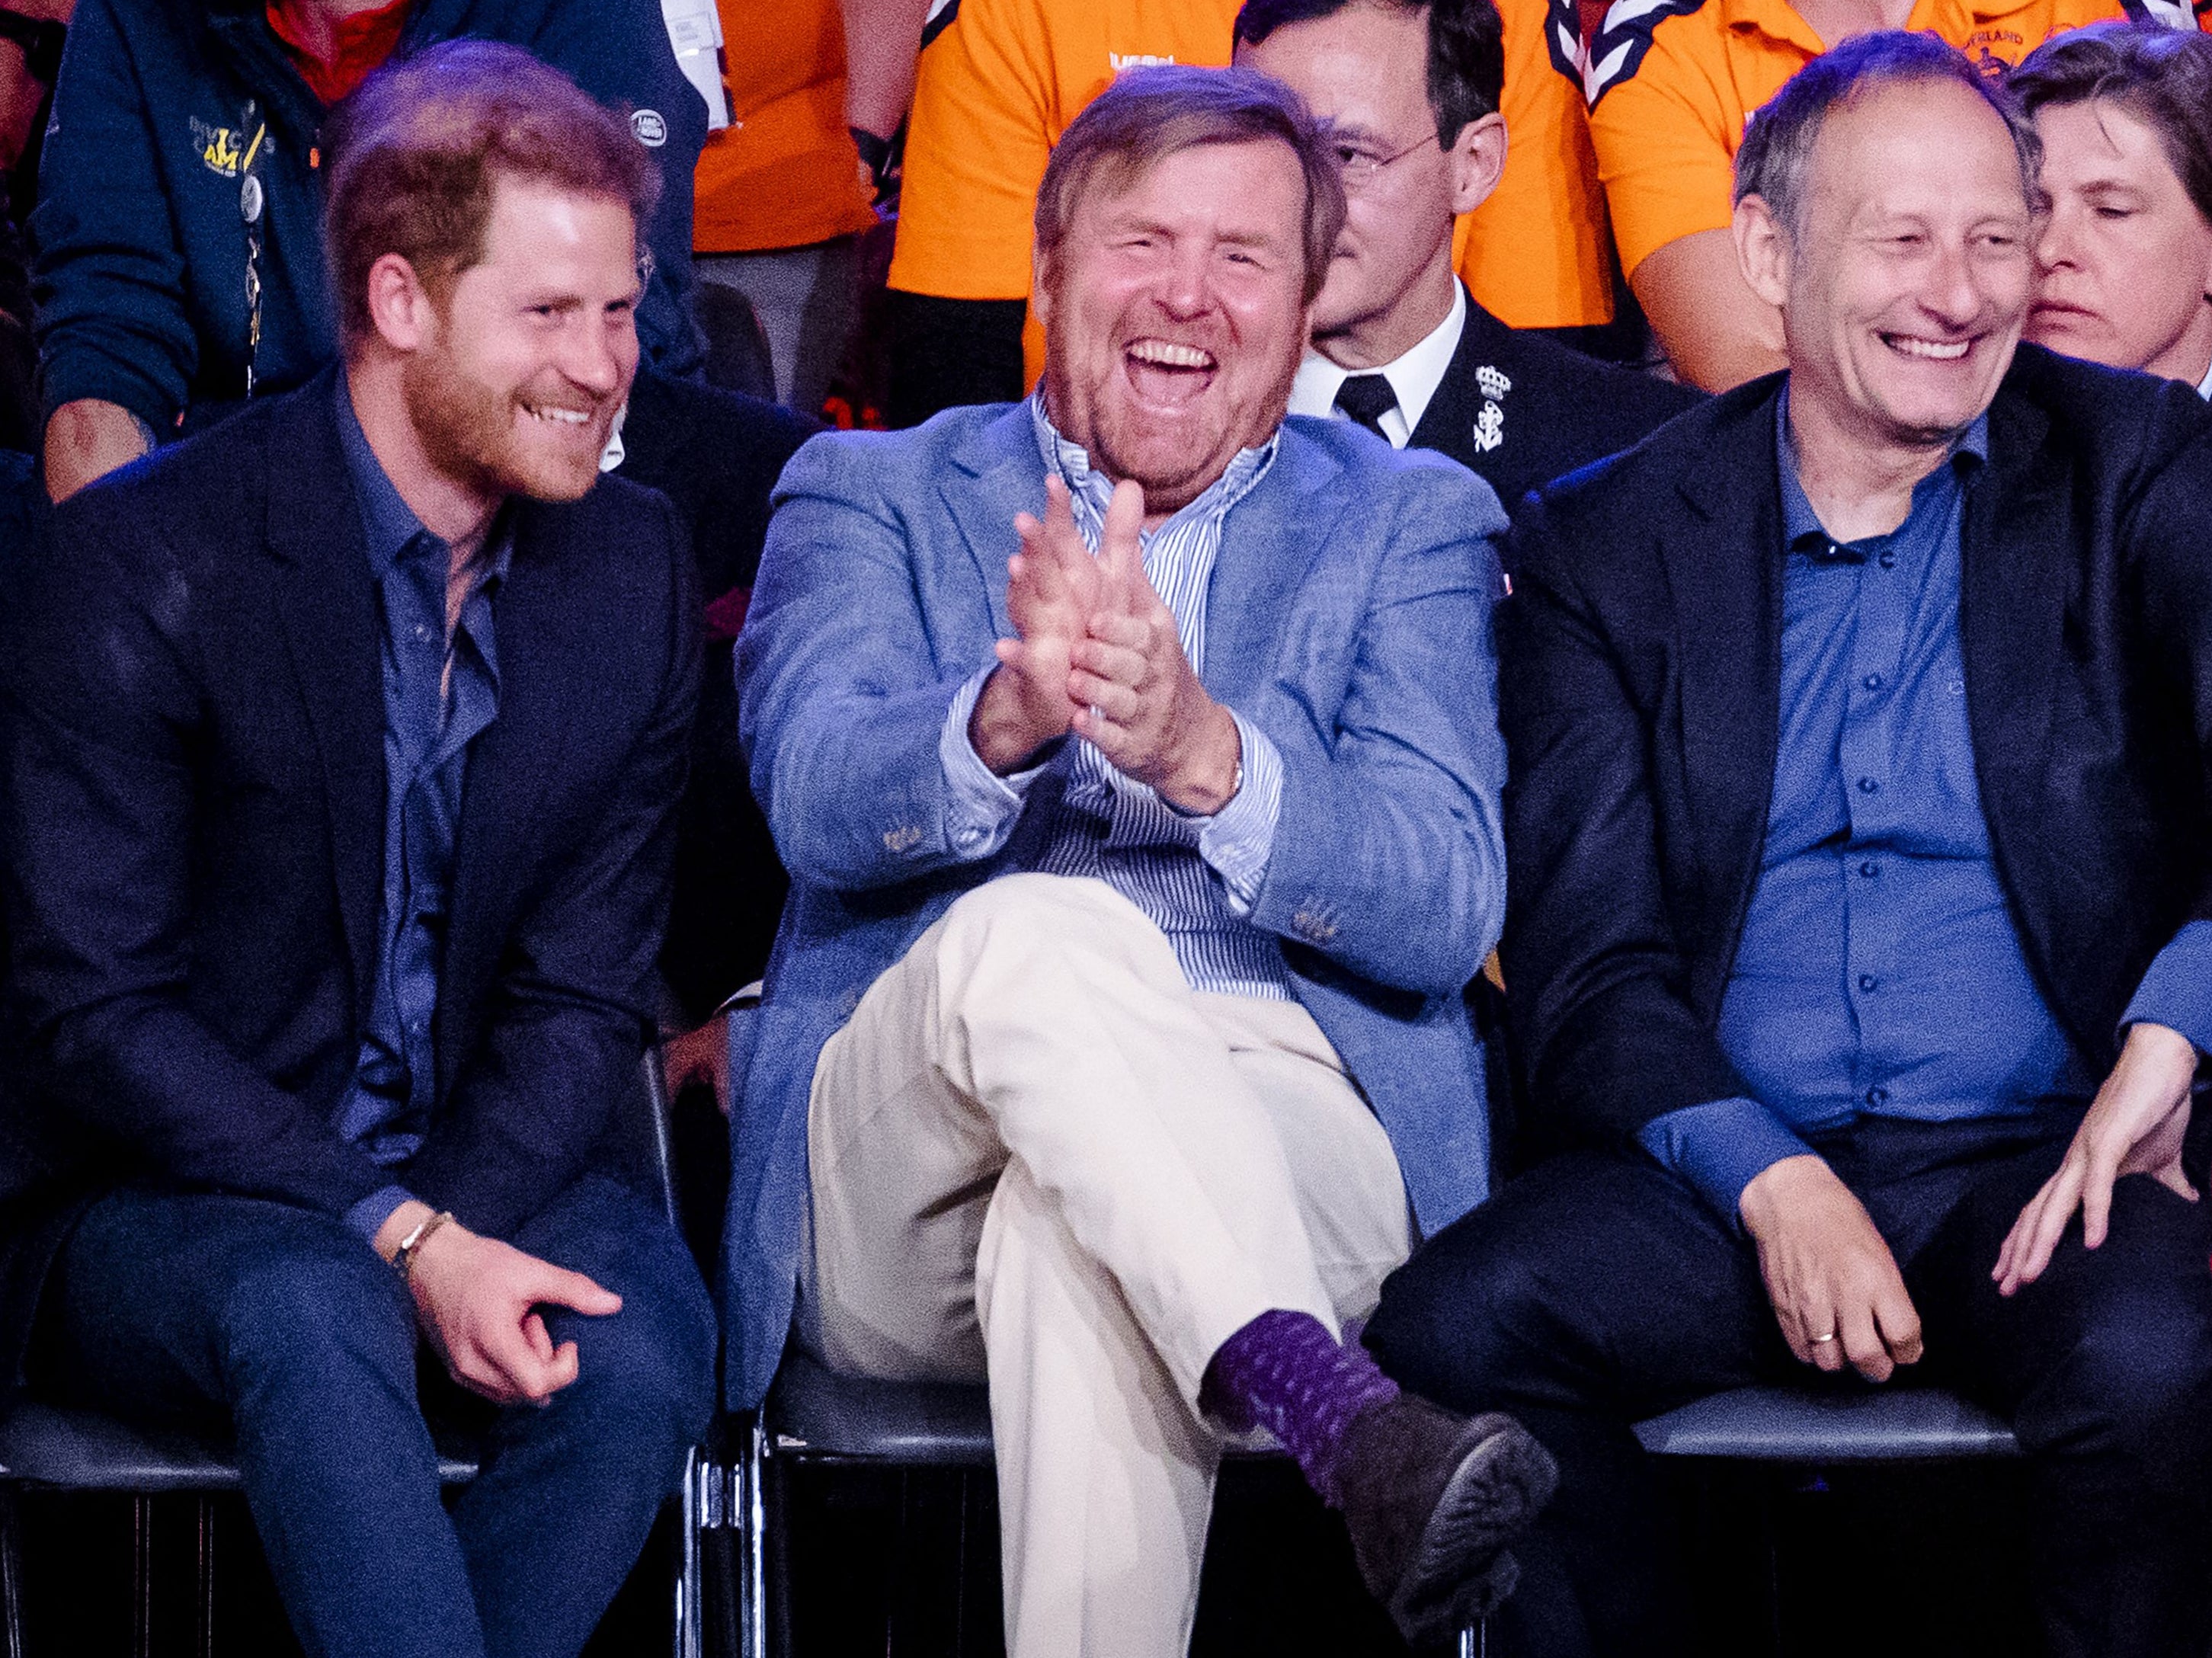 Prince Harry watches the wheelchair basketball final with King Willem-Alexander (centre) and Dutch General Mart de Kruif on Friday 22 April